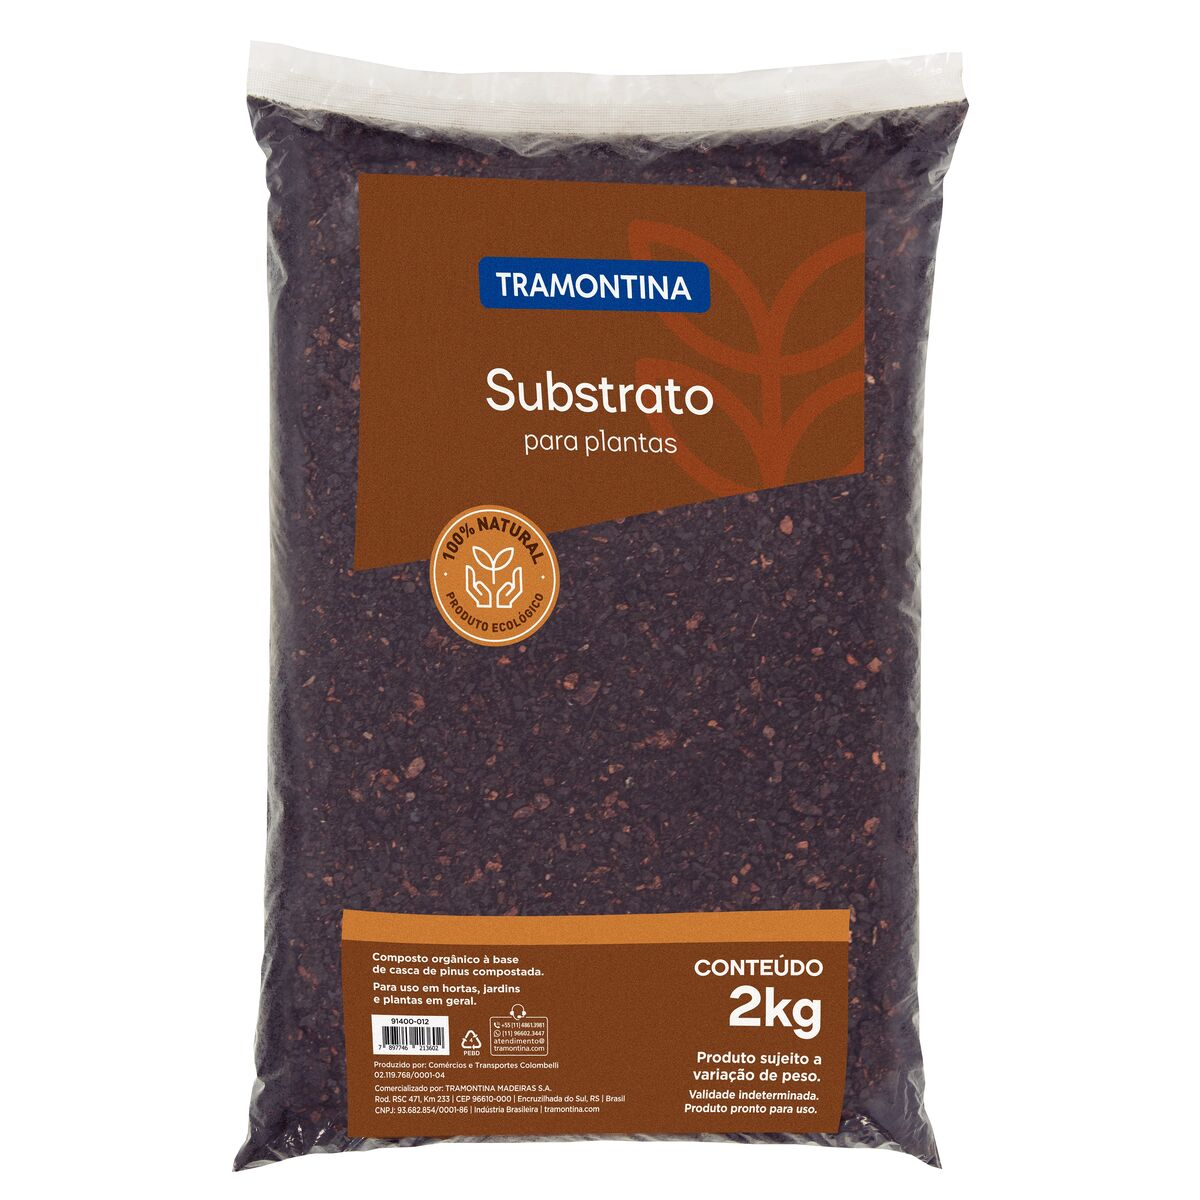 Tramontina 2kg Plant Substrate
